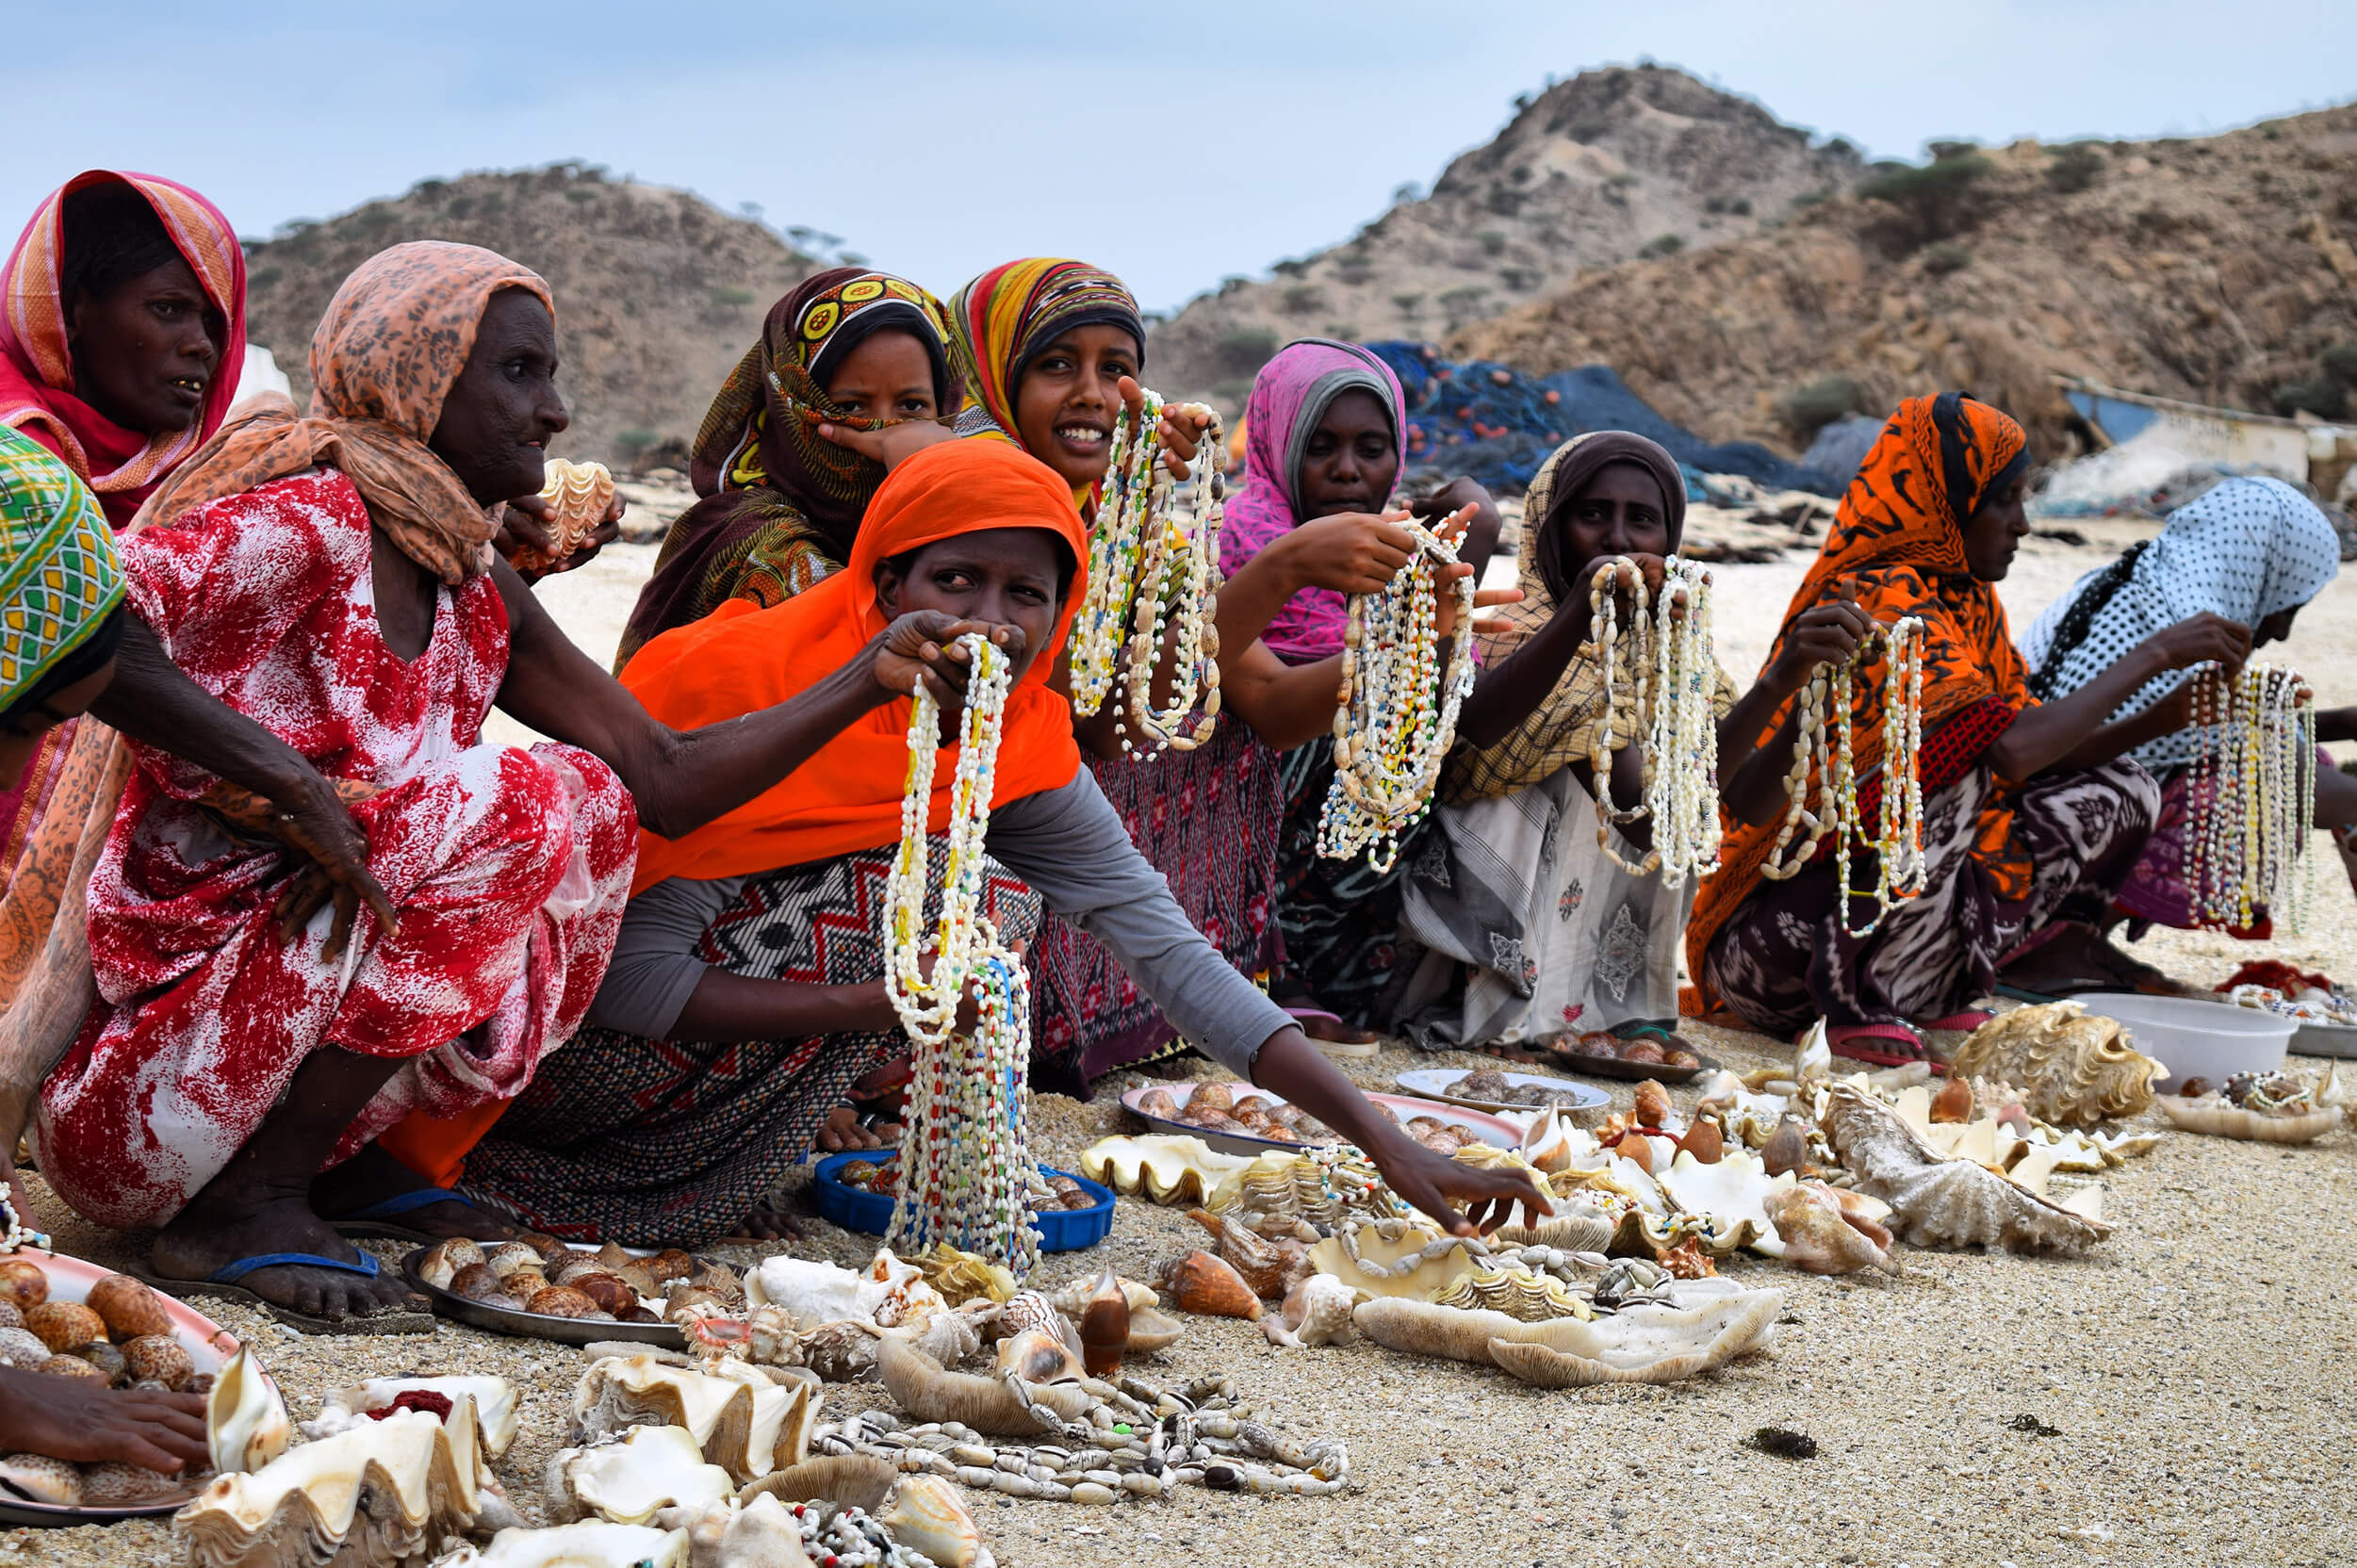 A colourful group of women selling jewellery on some hard-to-reach Eritrean islands